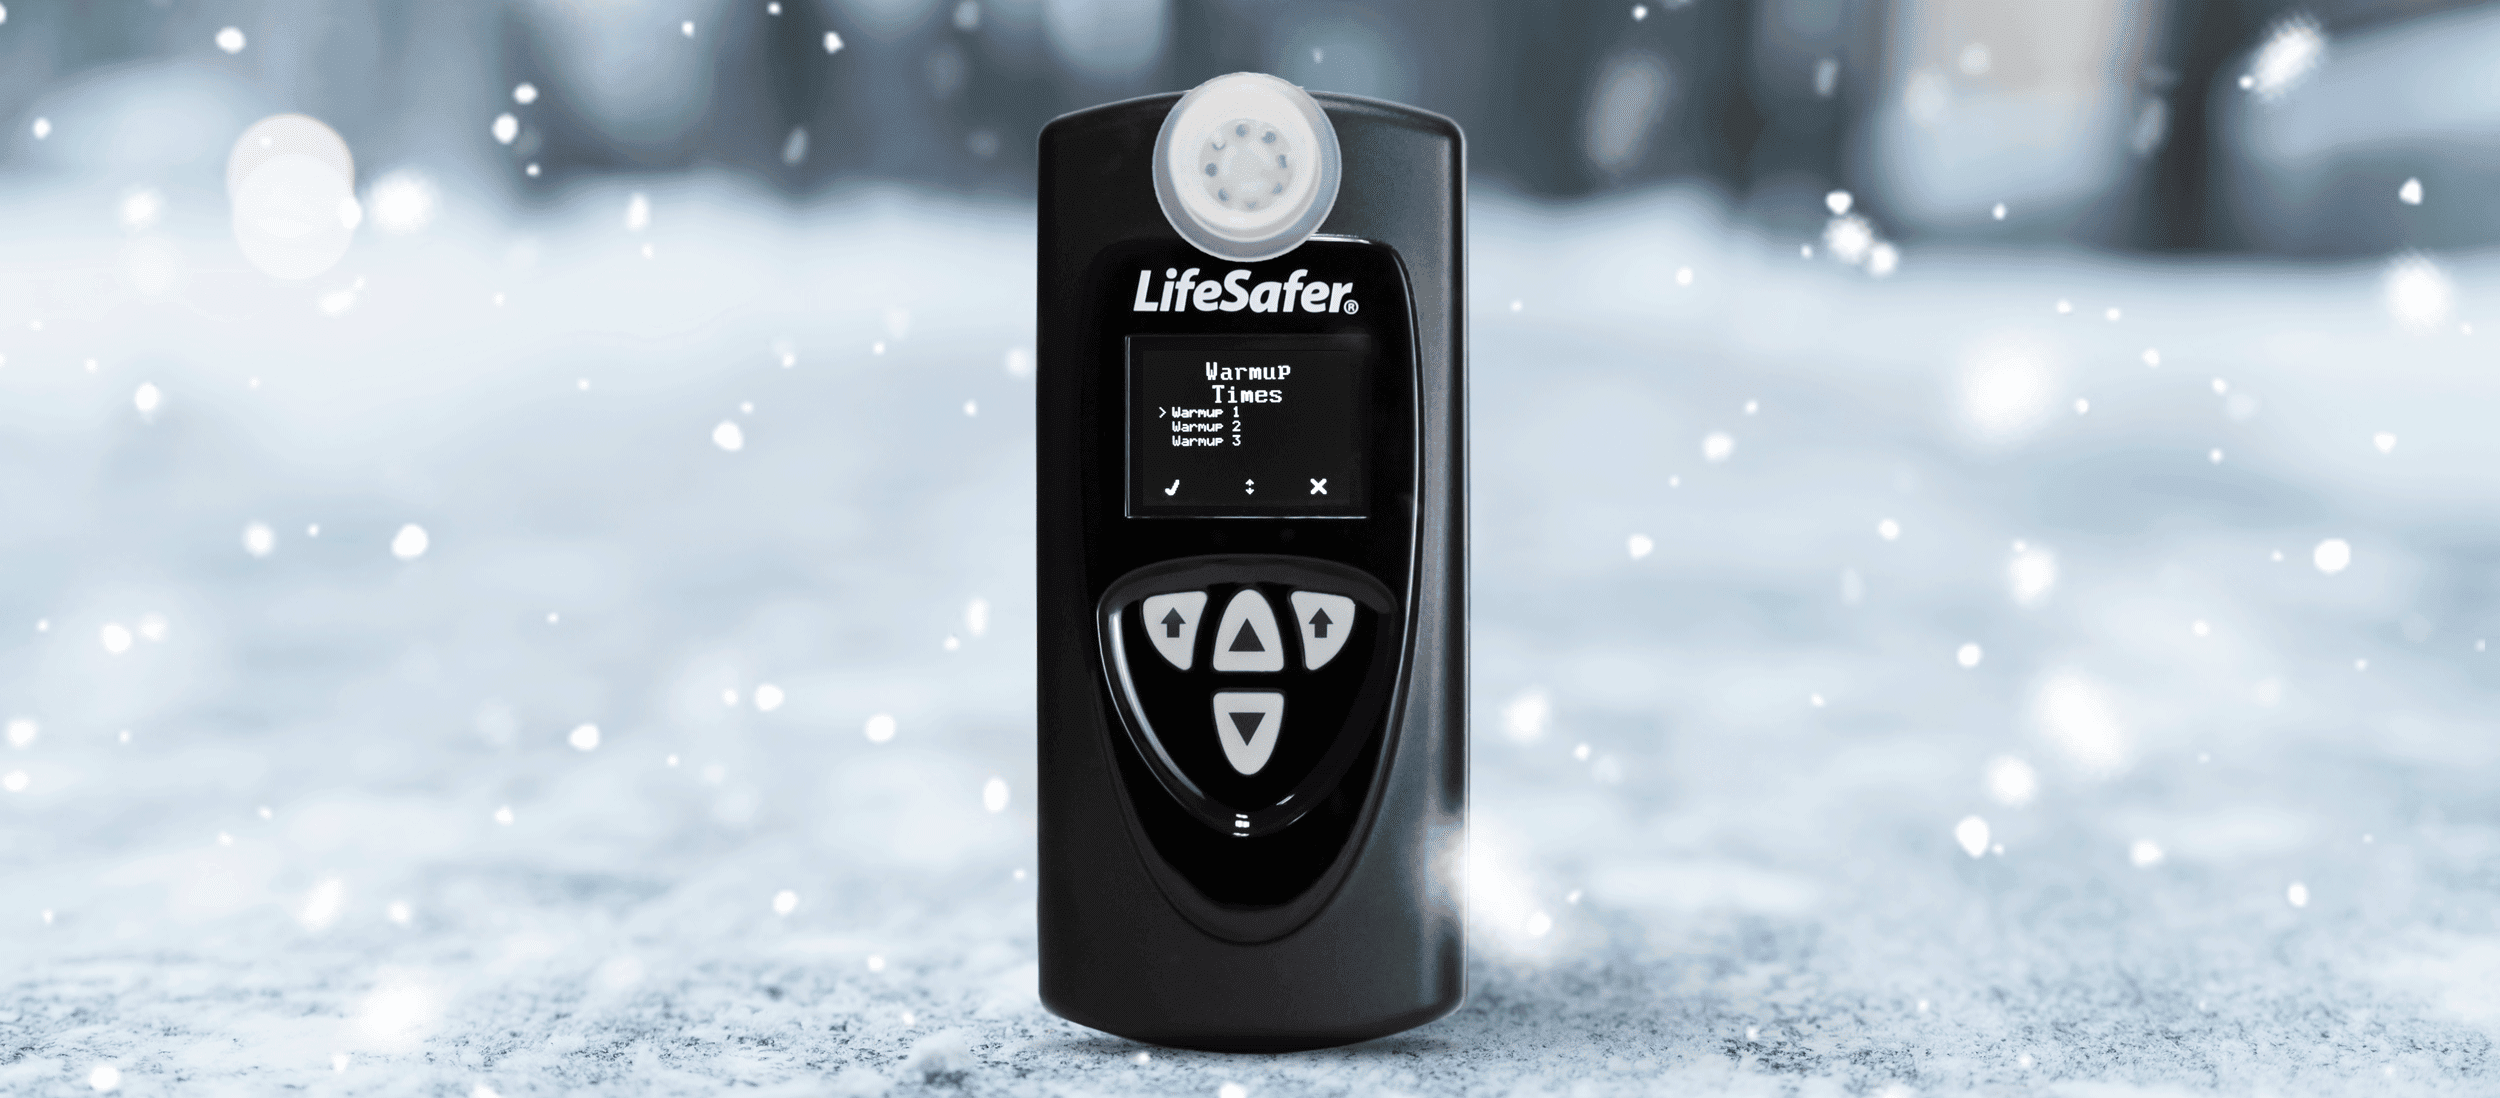 The Best Ignition Interlock Won’t Leave You Out in the Cold